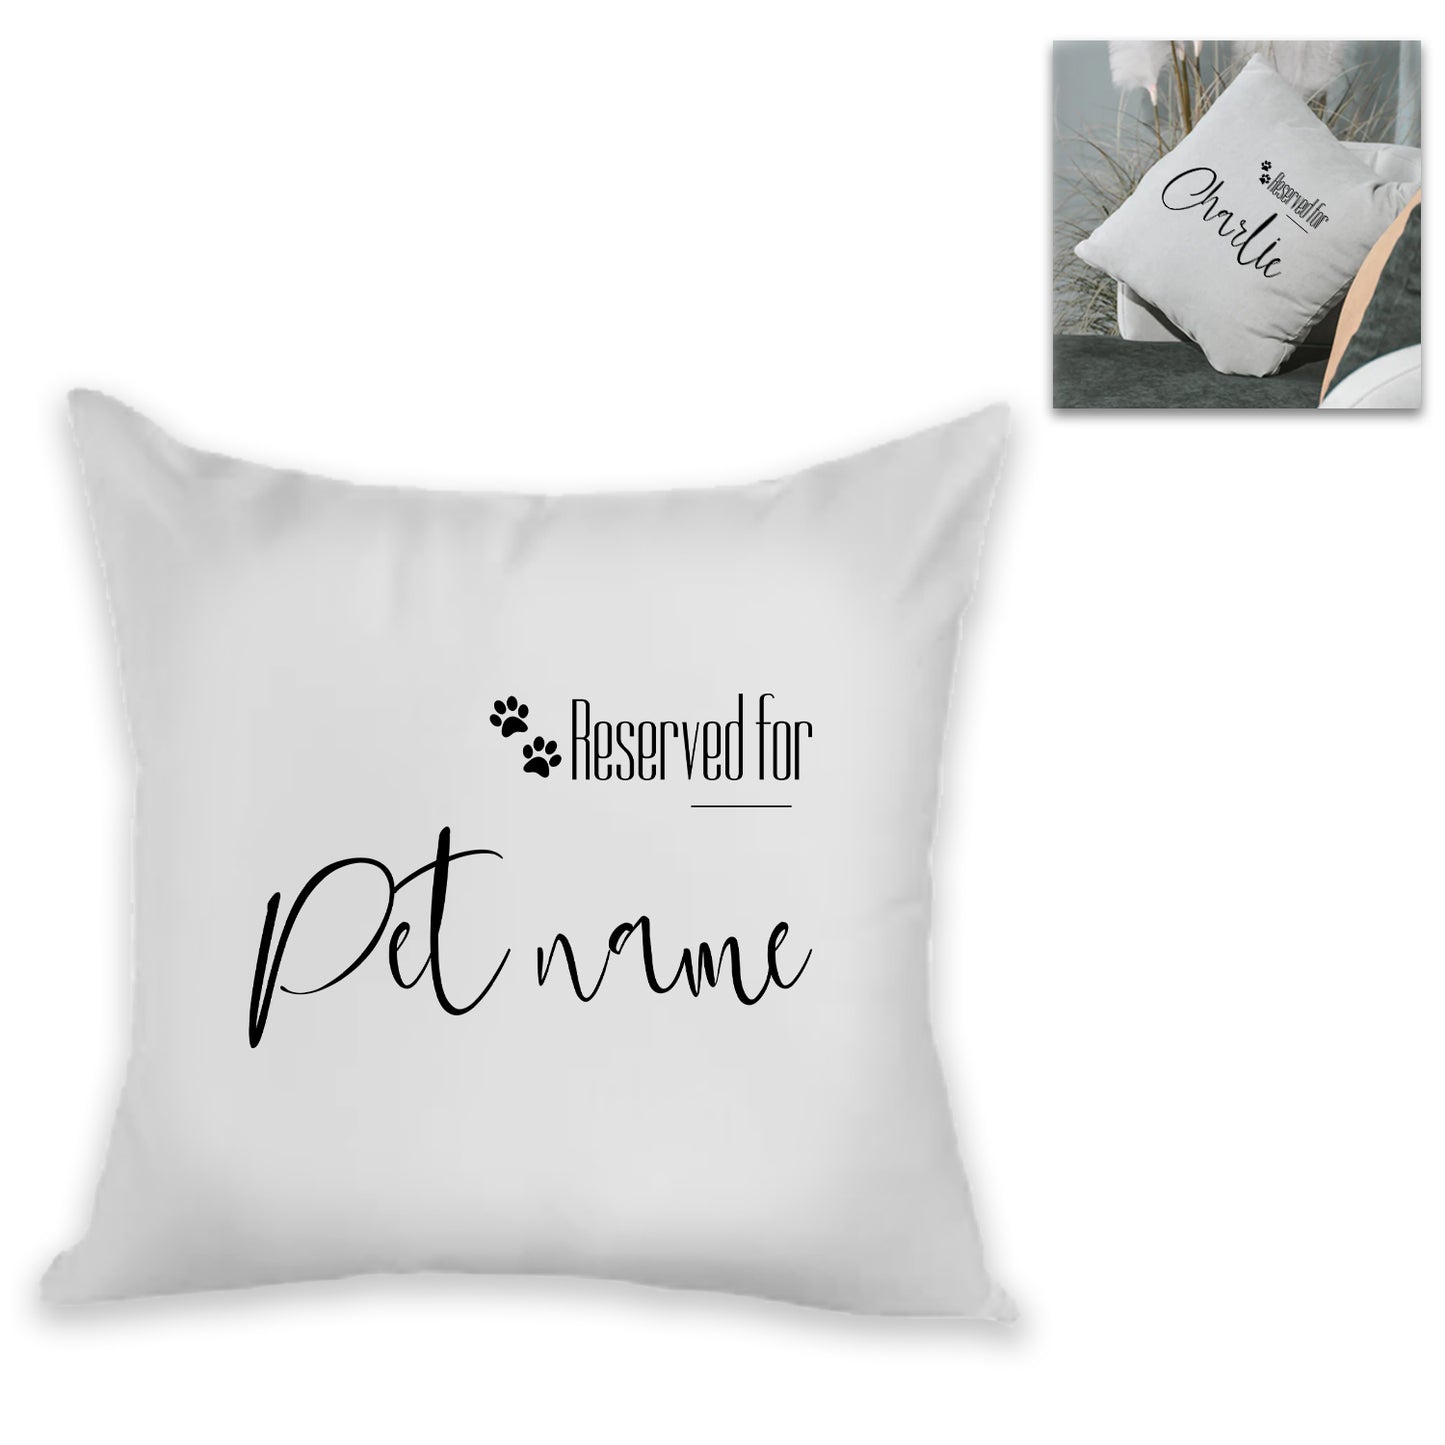 Personalised Cushion - Reserved for Pet Name Image 2